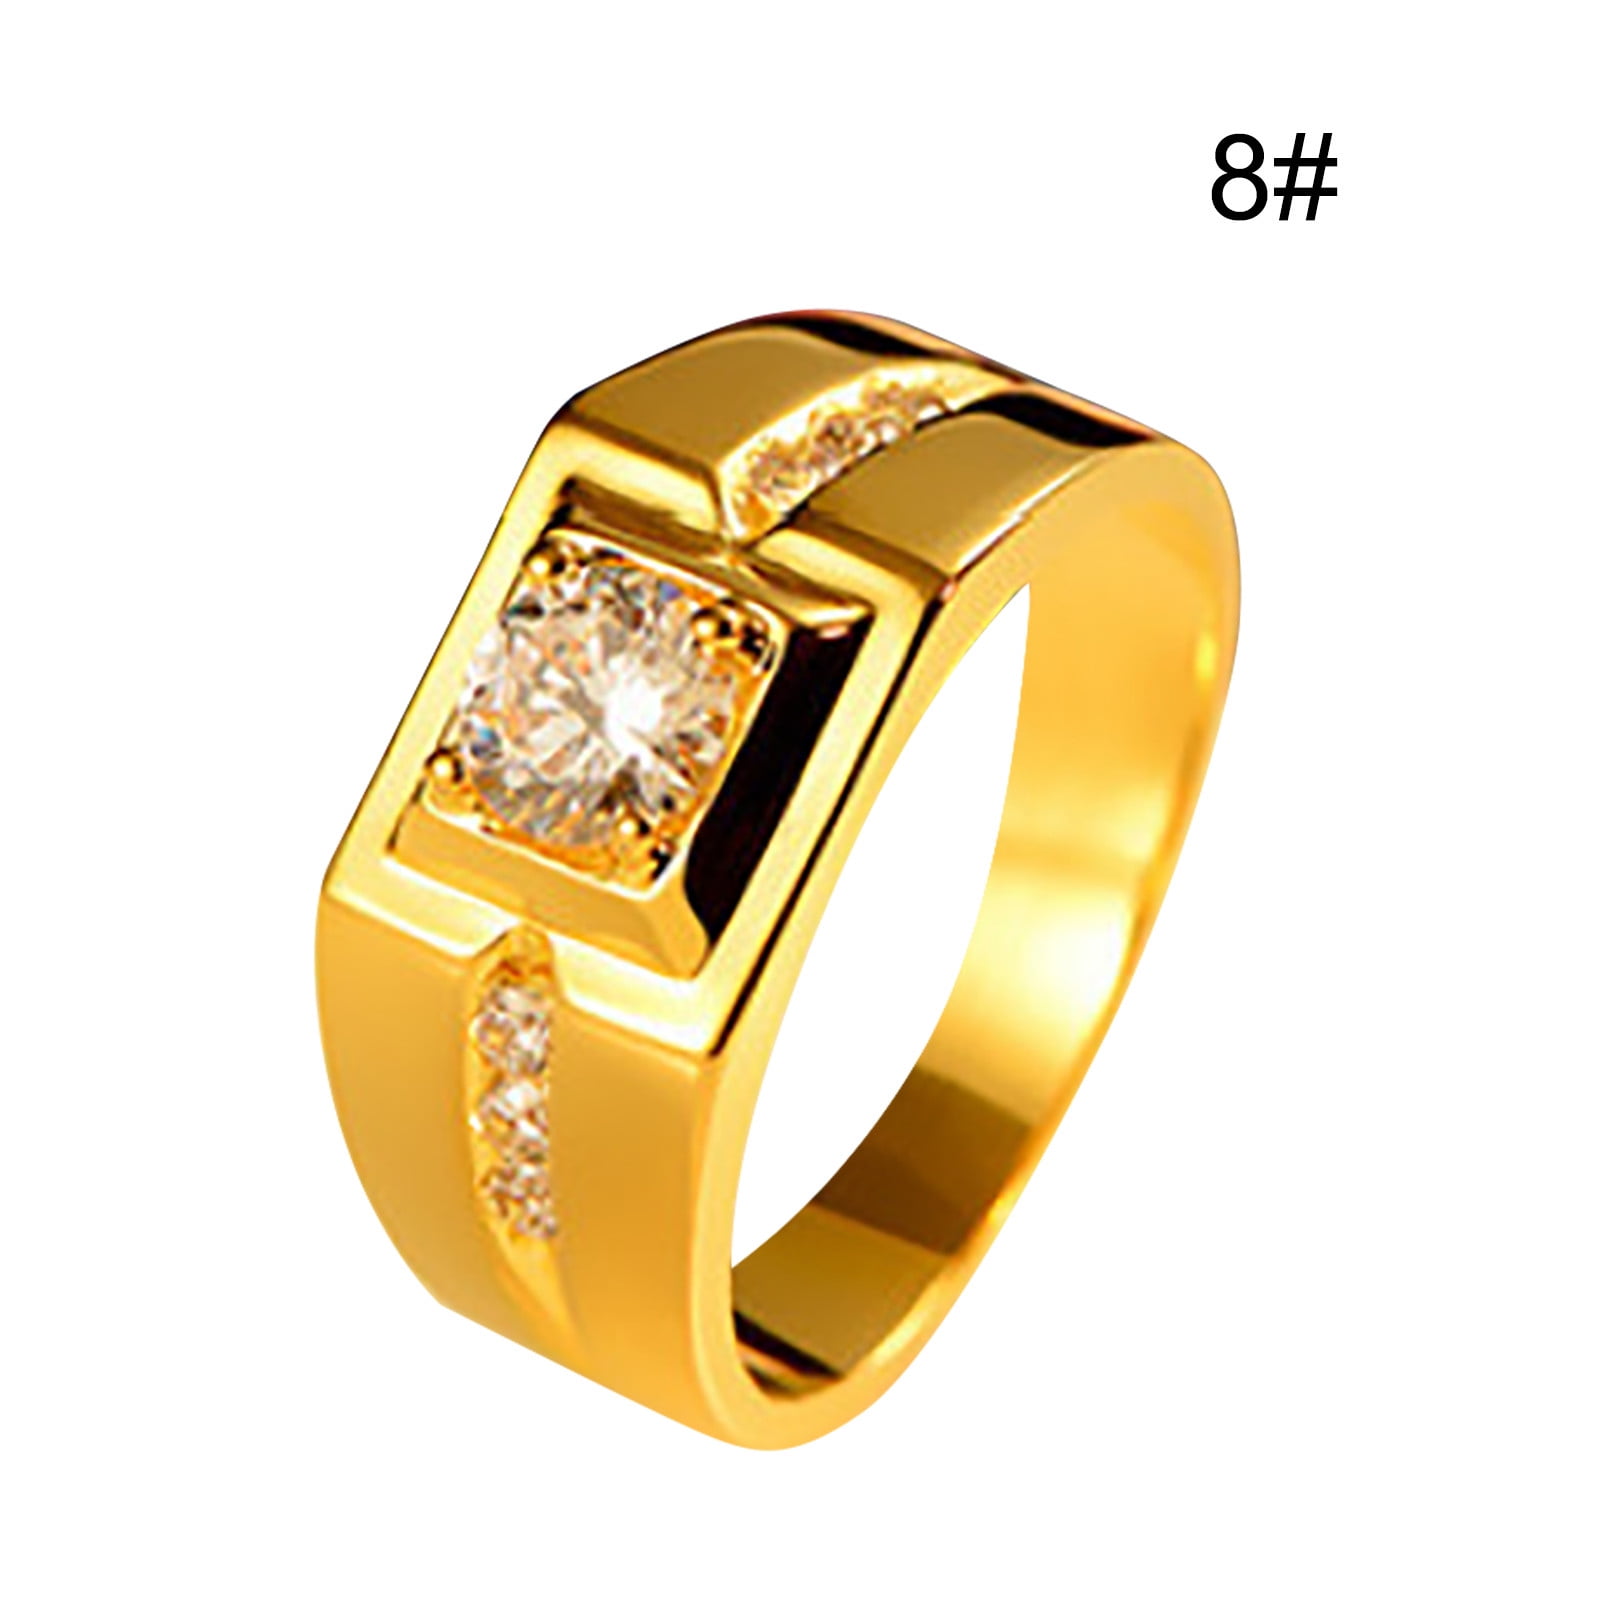 New ring designs in gold for female|gold ring design for girls|Most  beautiful and Stylish gold rings - YouTube